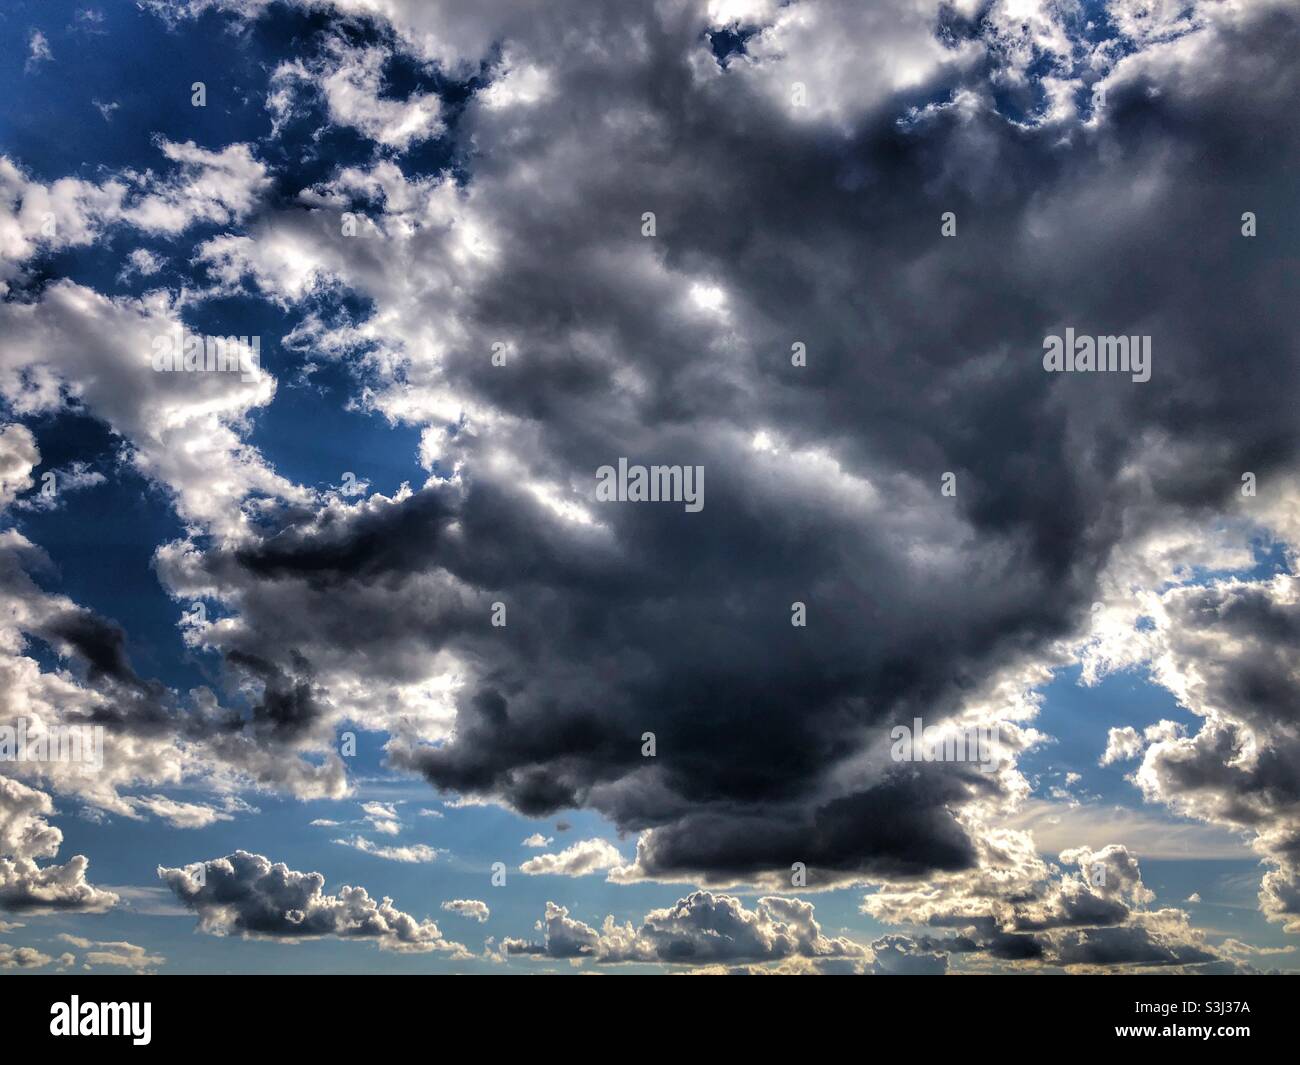 Ominous clouds filling the sky. Stock Photo